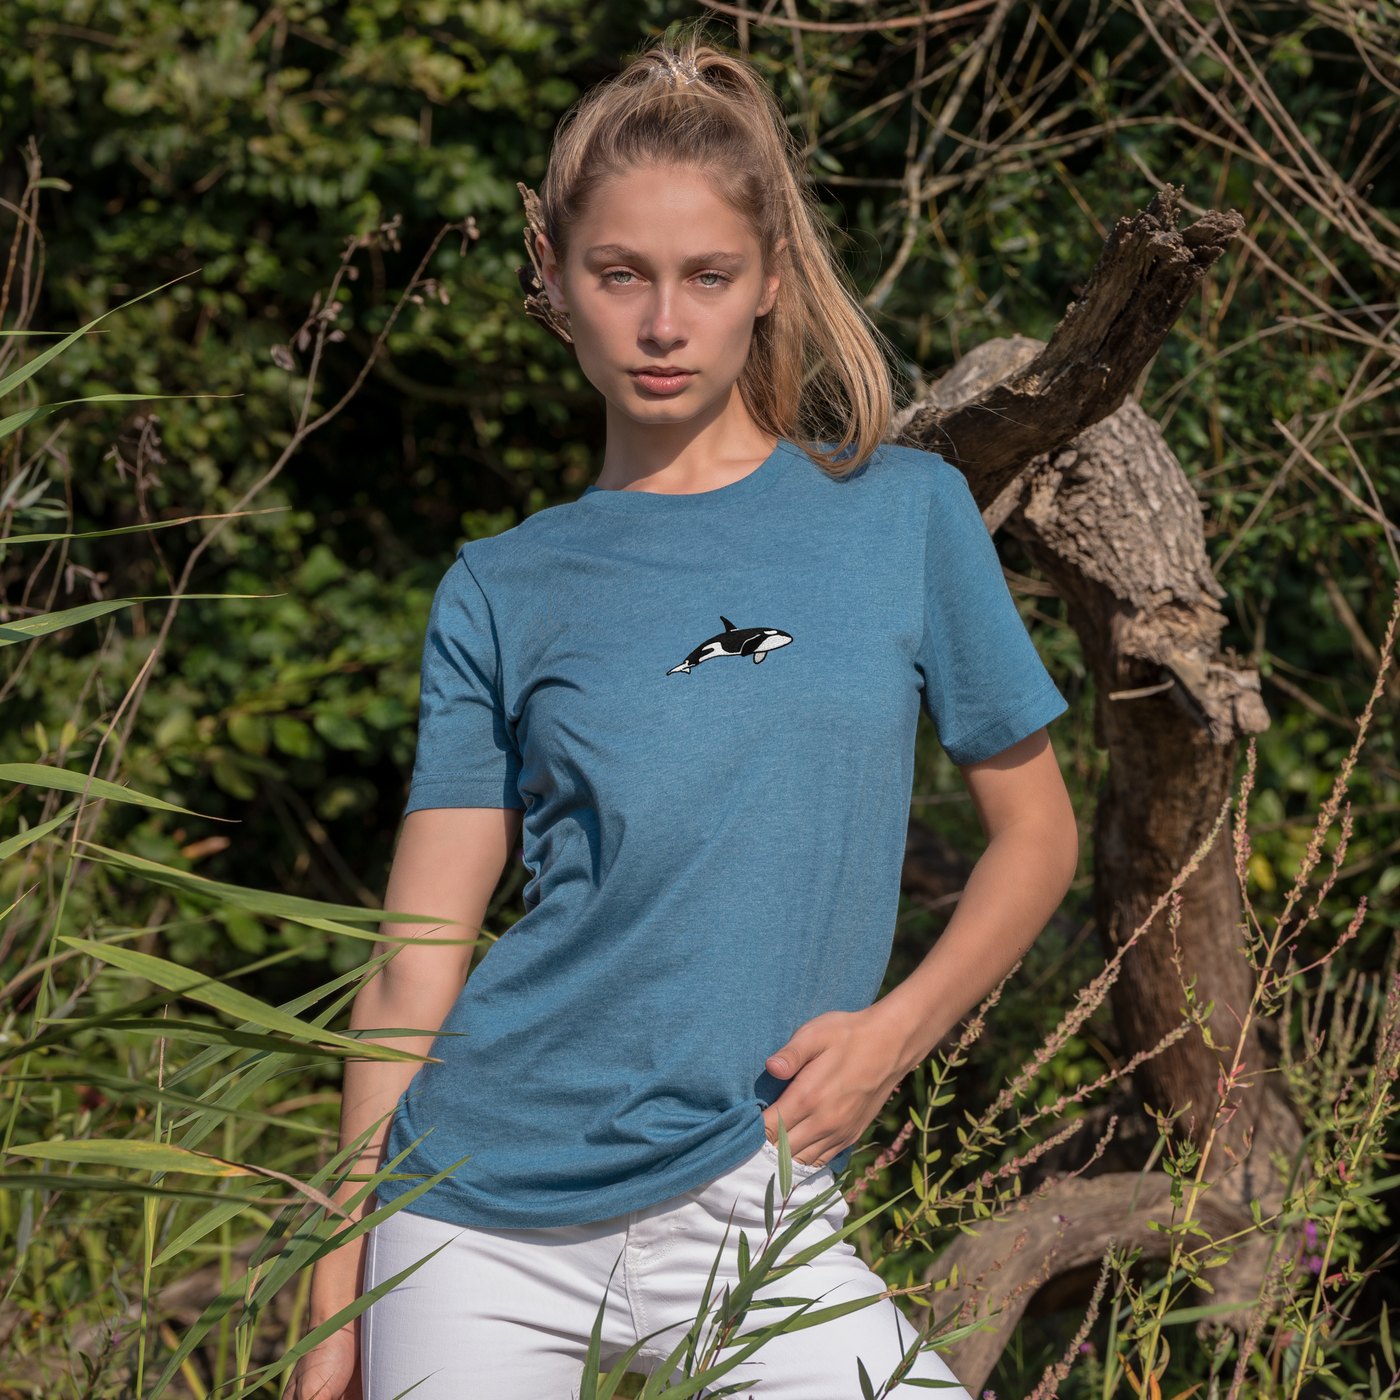 Bobby's Planet Women's Embroidered Orca T-Shirt from Seven Seas Fish Animals Collection in Heather Deep Teal Color#color_heather-deep-teal